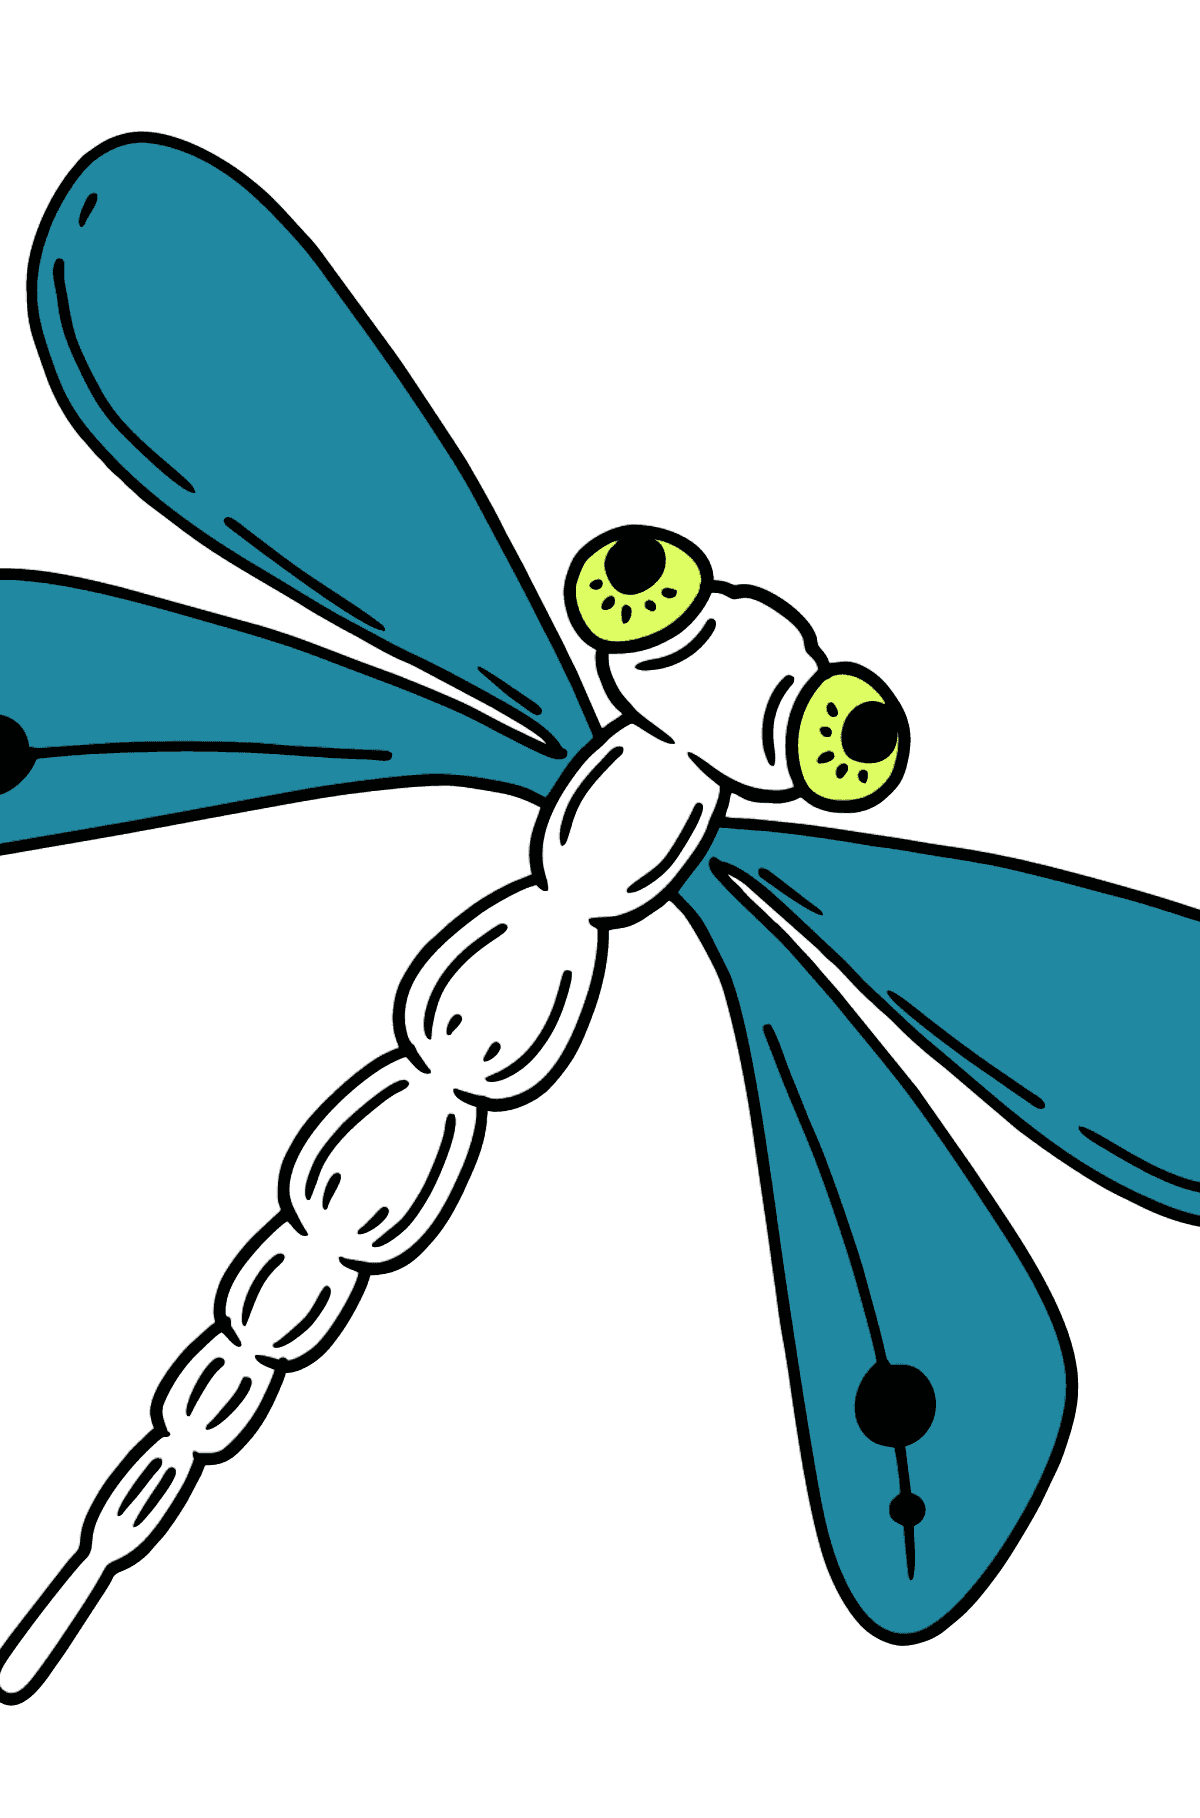 Dragonfly coloring page - Coloring Pages for Kids